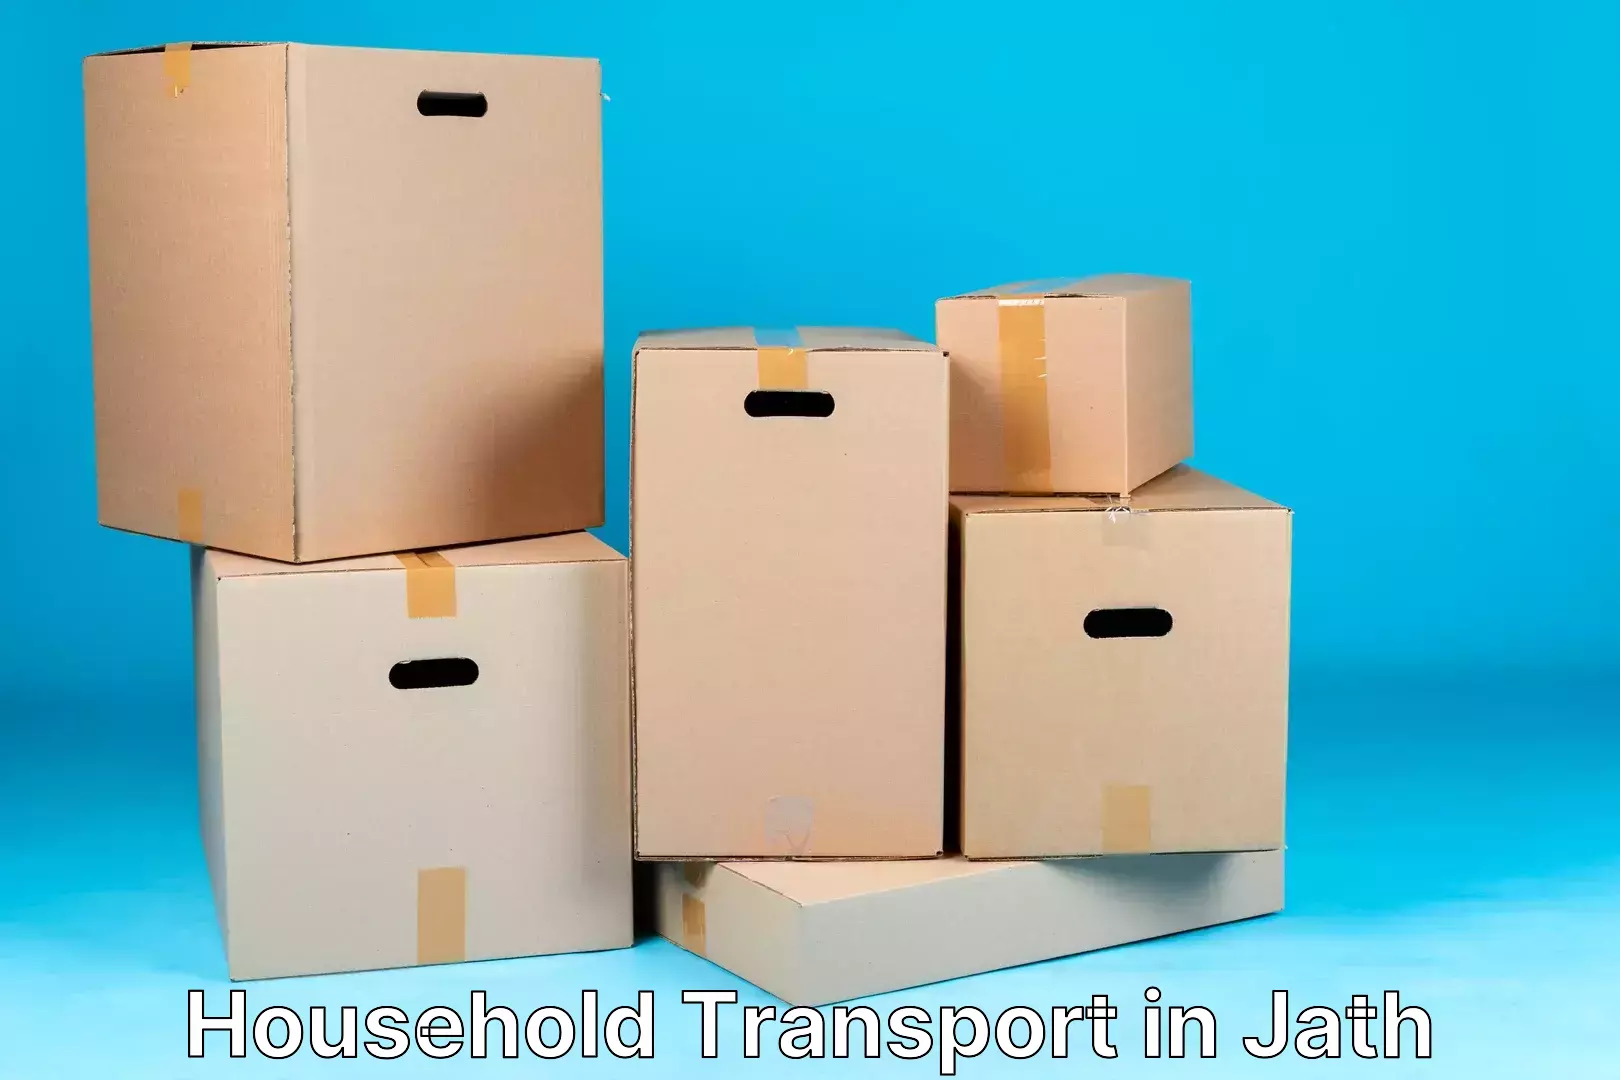 Quality relocation services in Jath